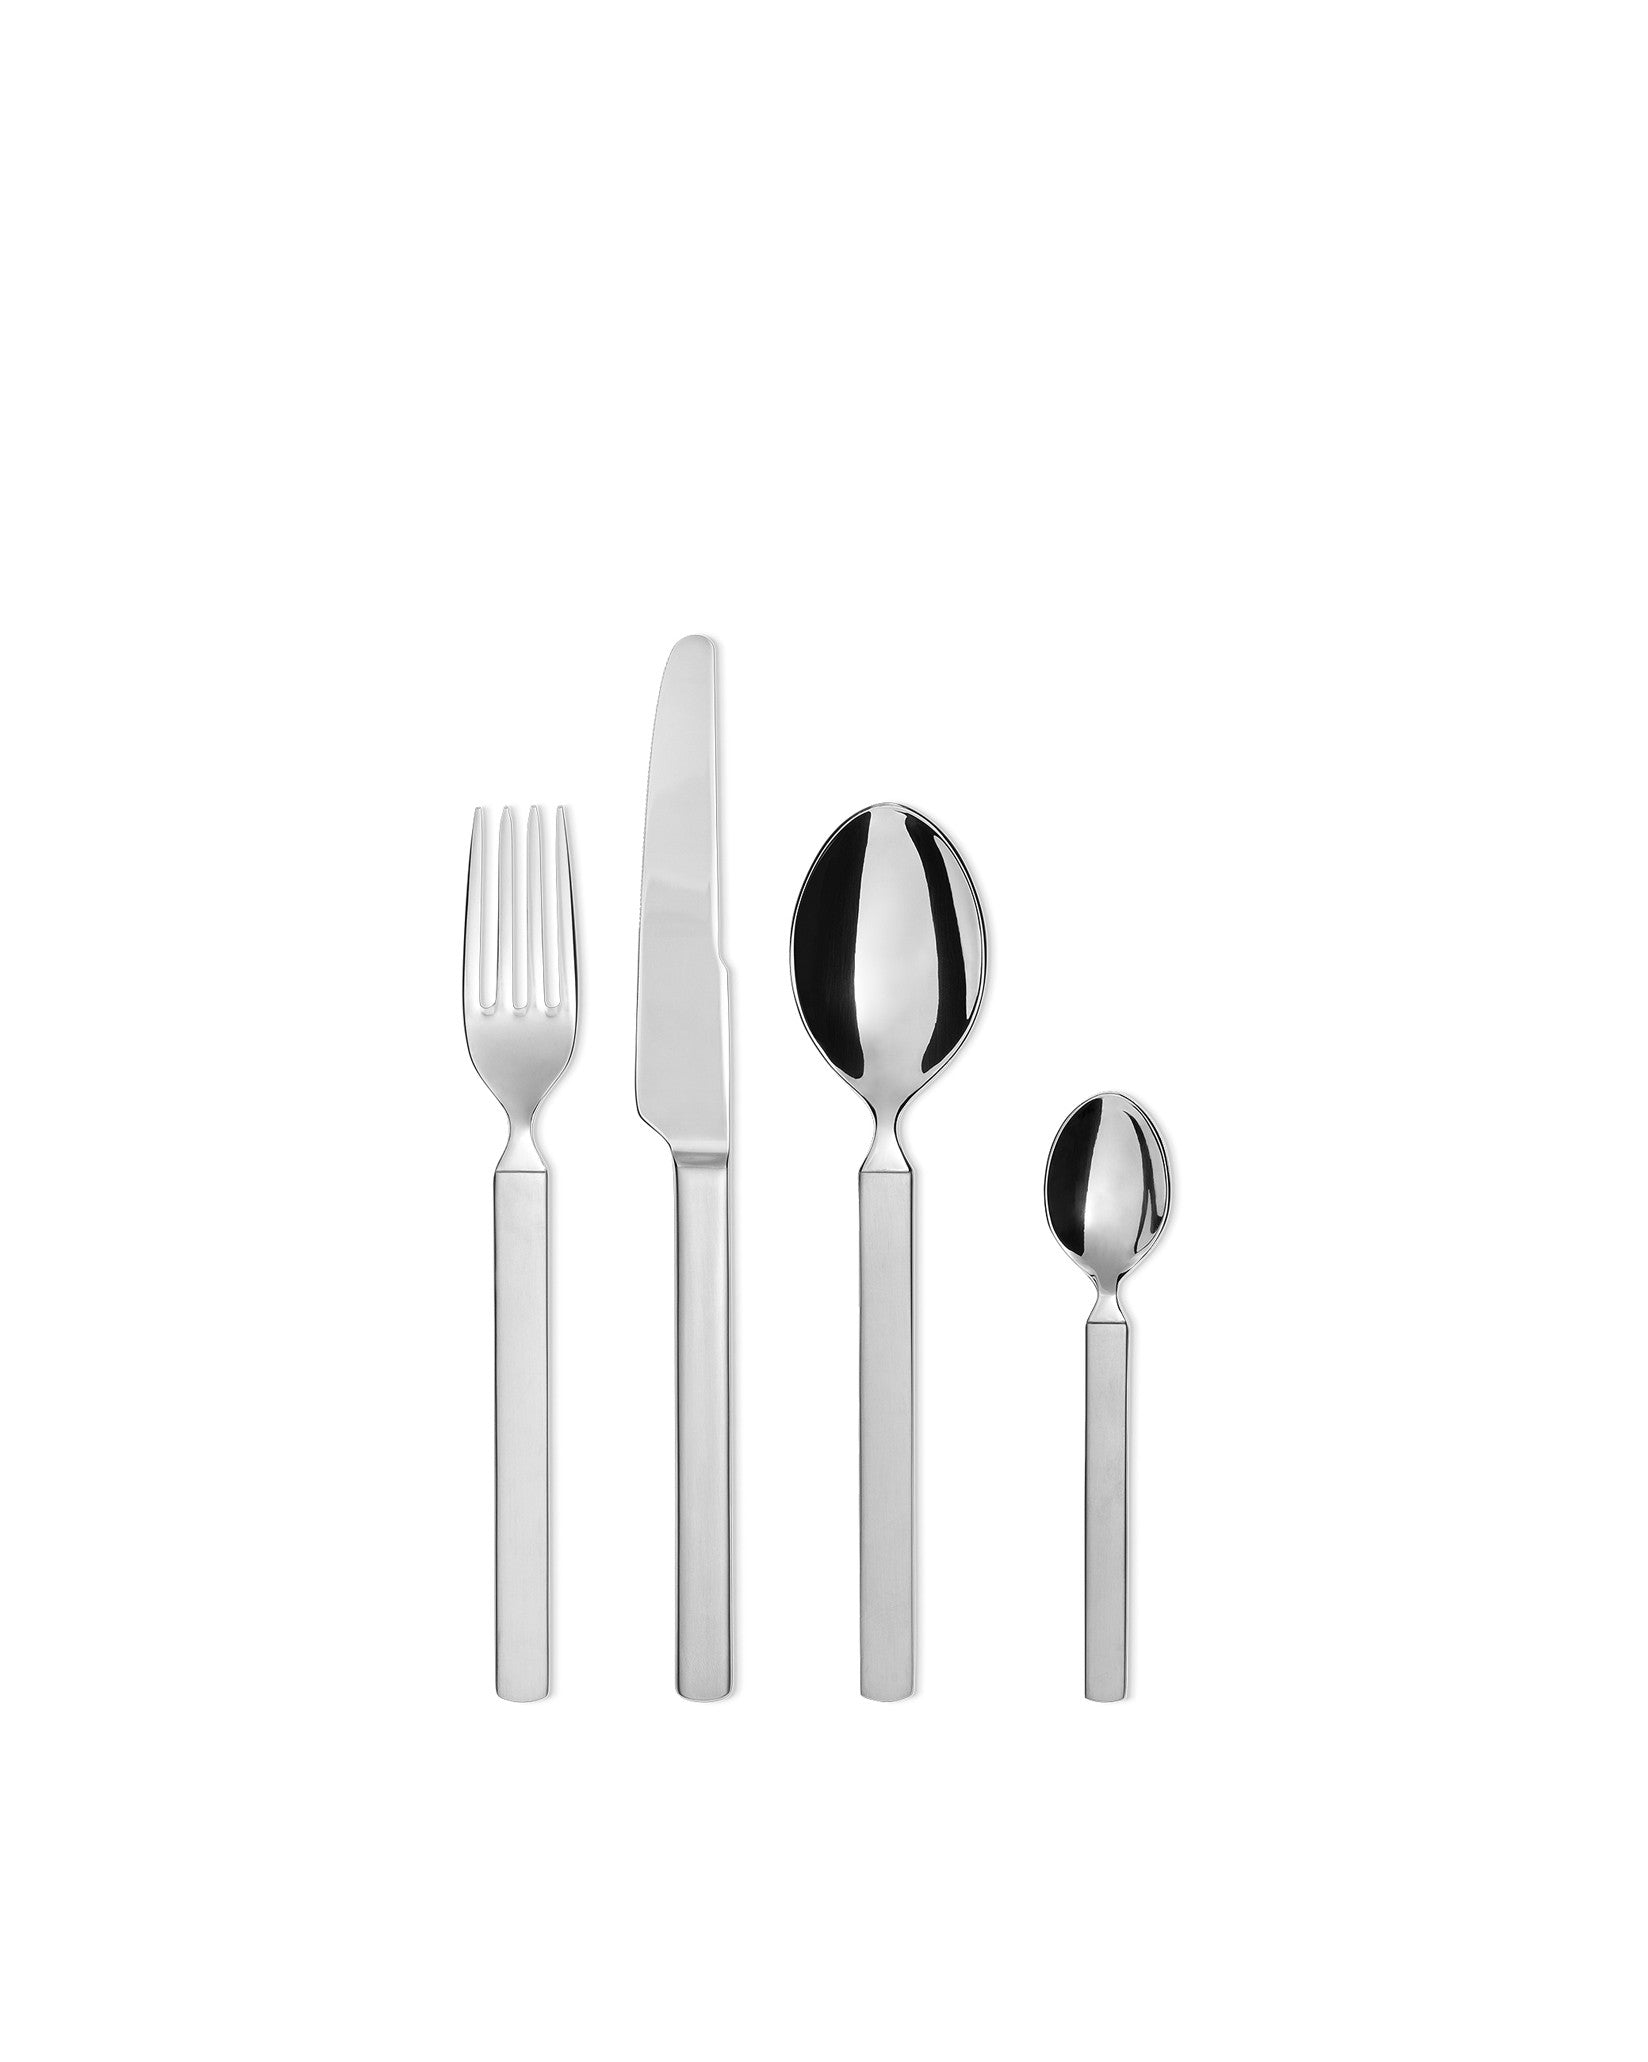 Dry - Cutlery set 24 – USA Alessi Inc pieces